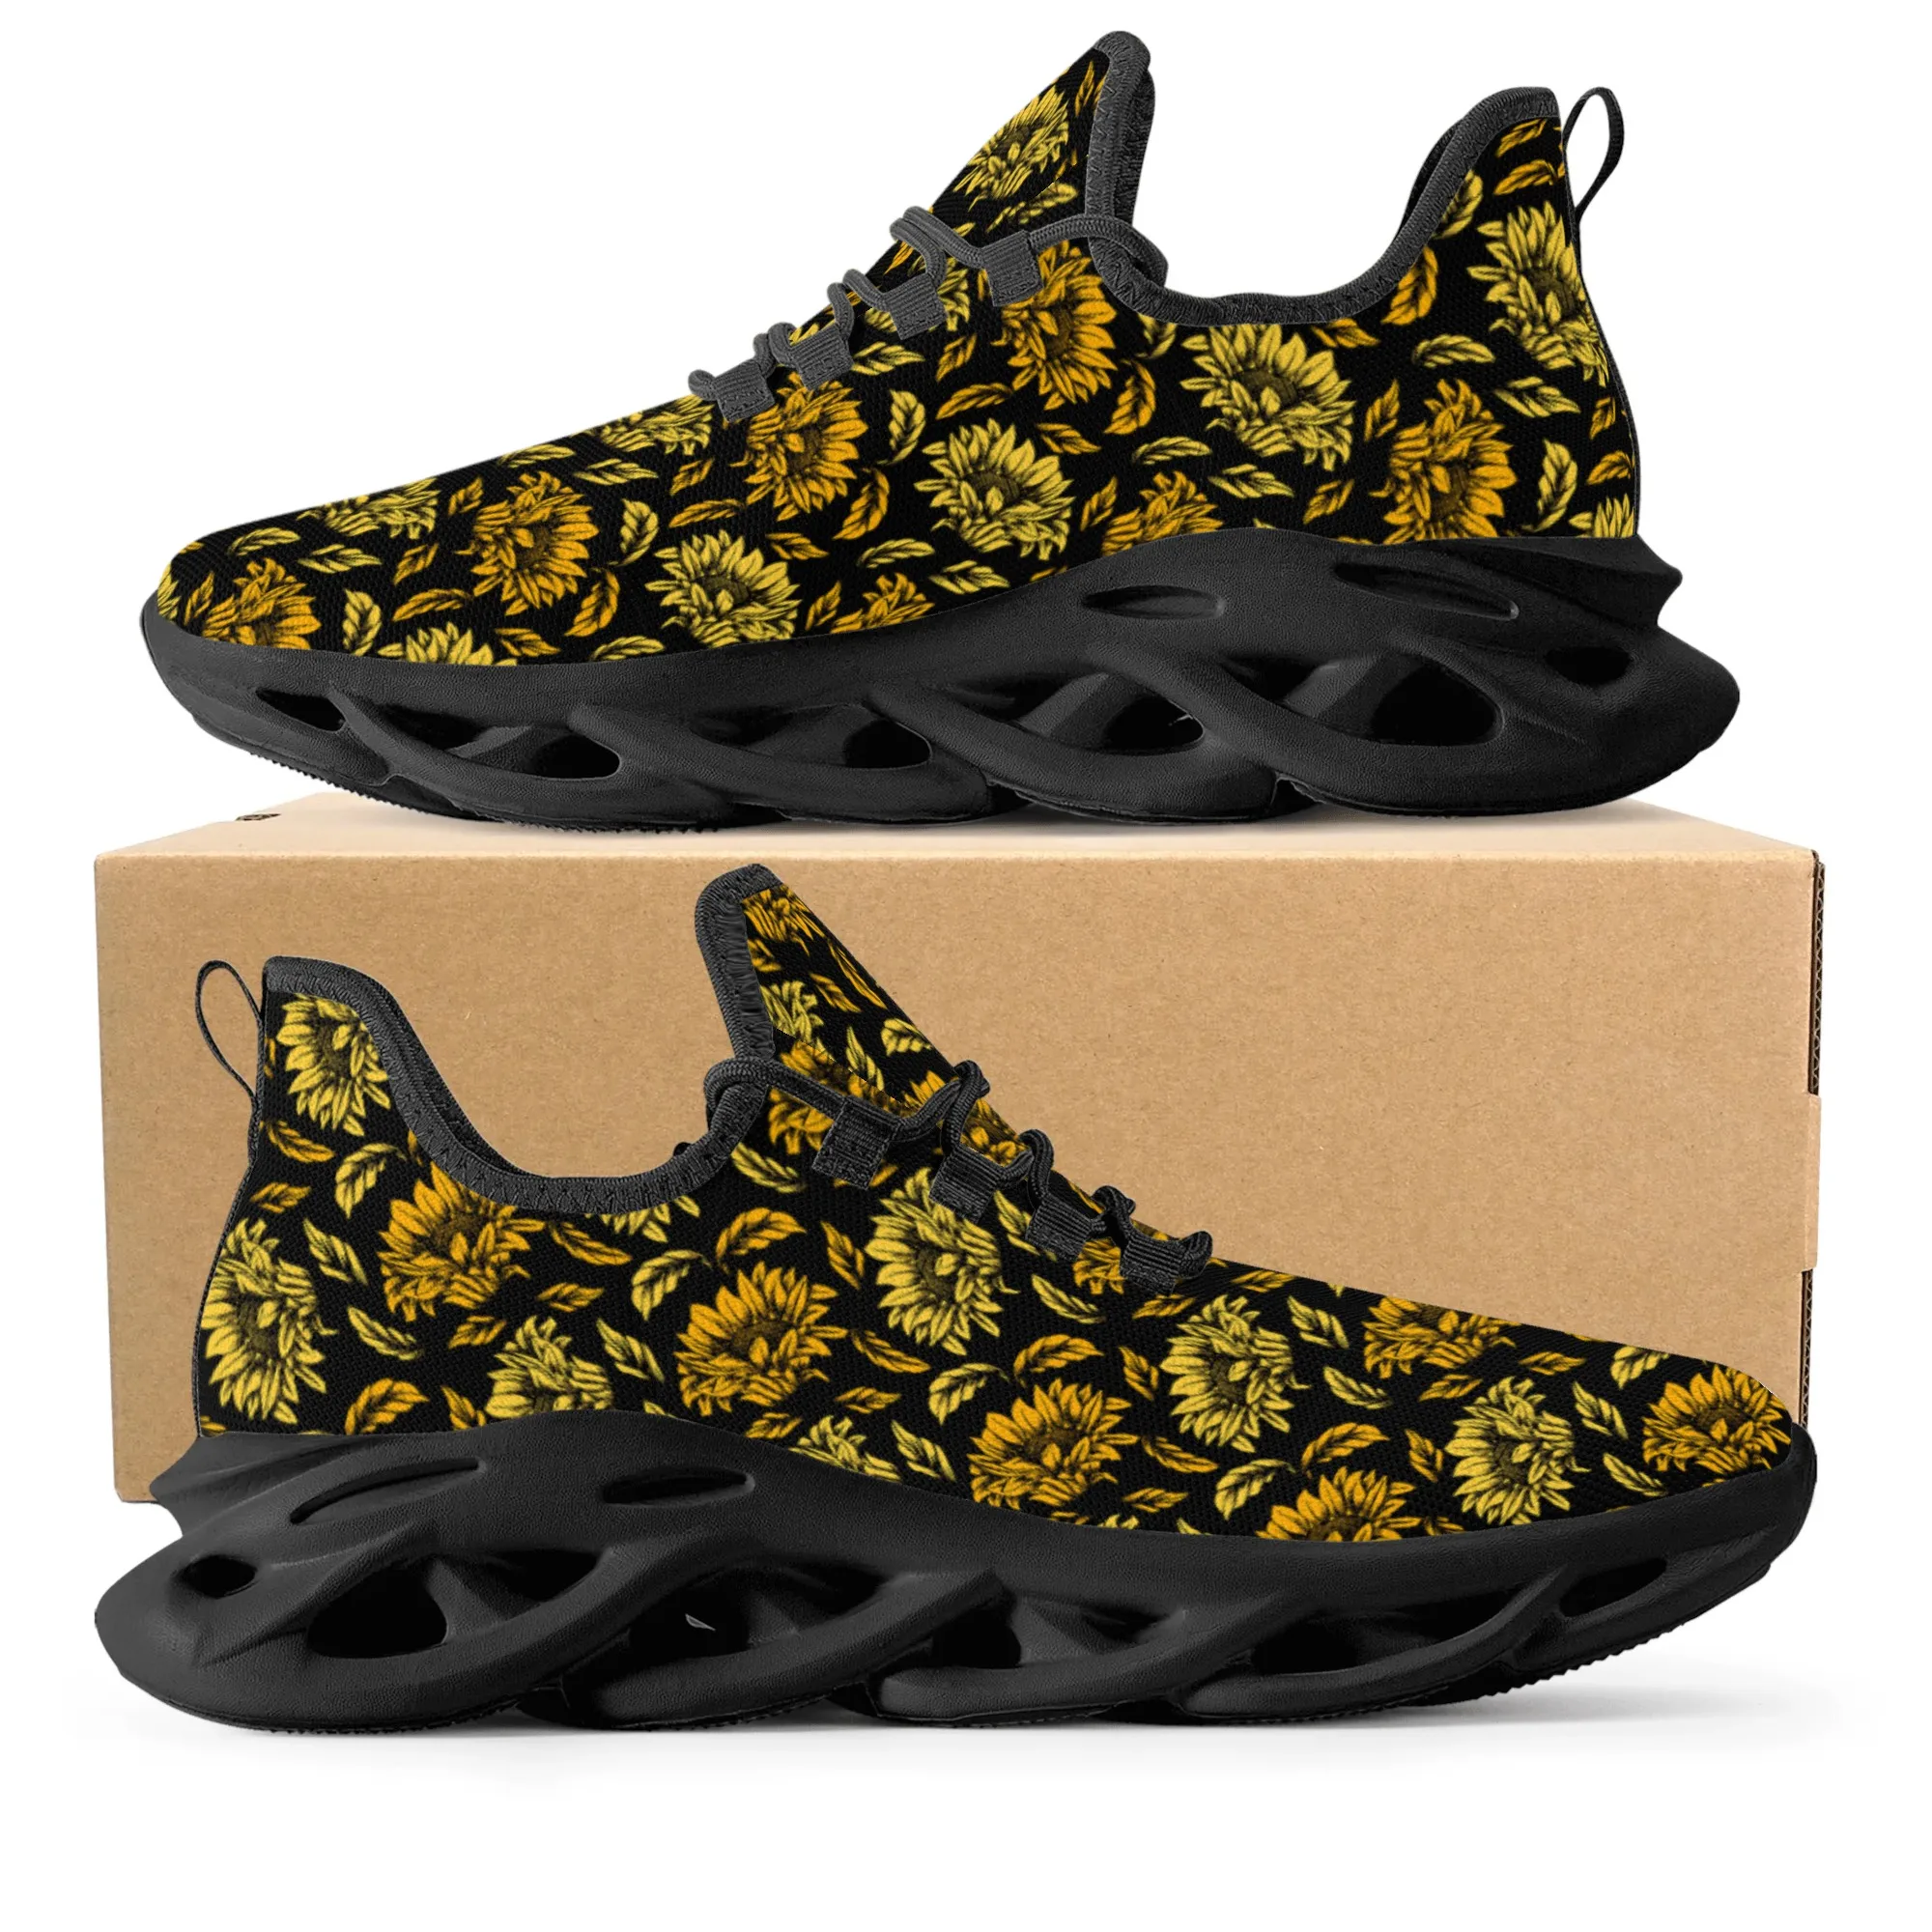 Sunflowers Print Design Fashion Funny Sneakers Men Women Teenager Breathable Mesh Casual Running Shoes Lace-Up Basketball Shoe